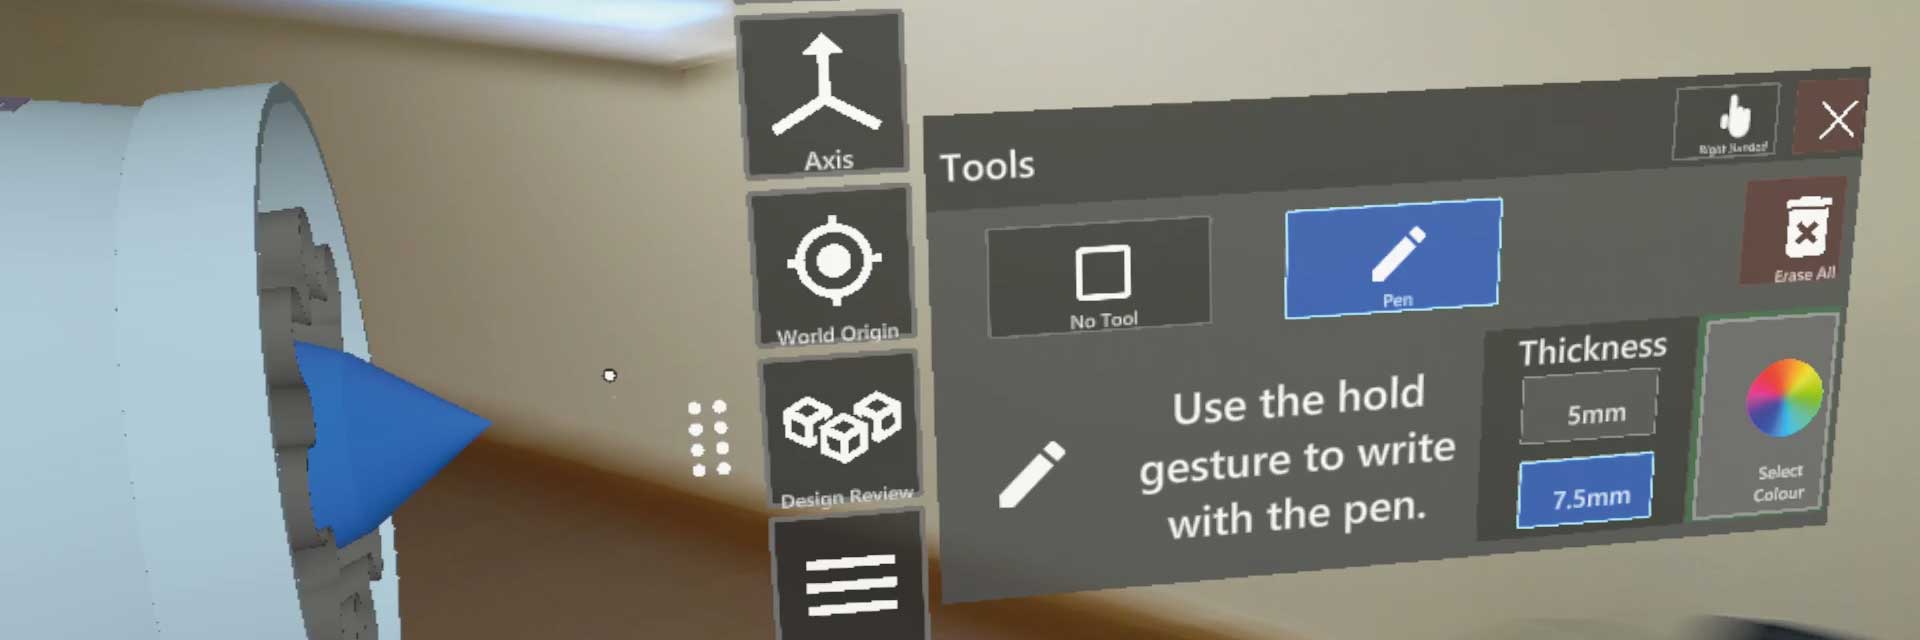 The new Tools feature in Theorem-XR for HoloLens 2 users